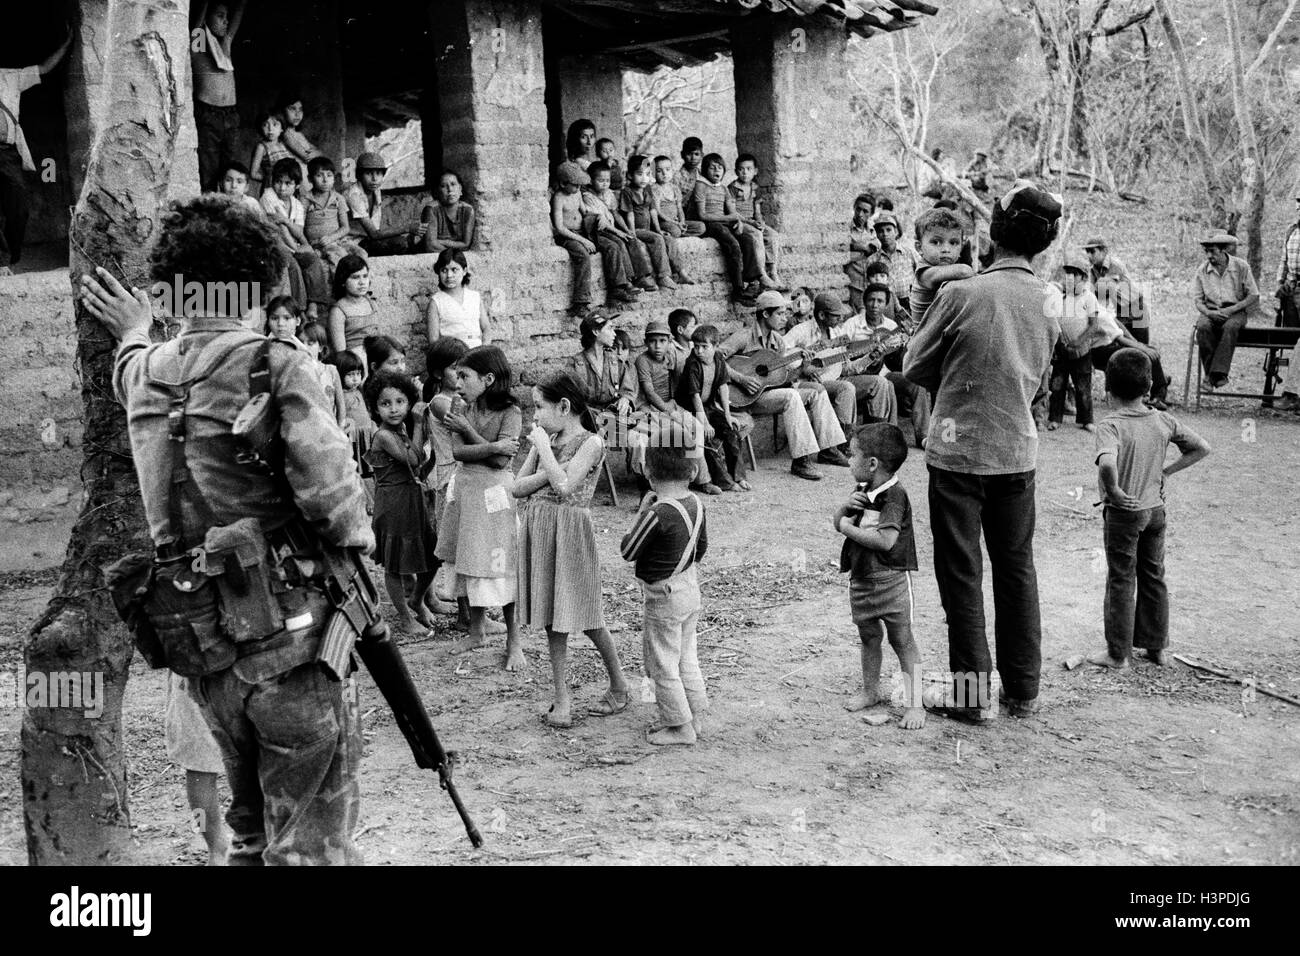 CHALATENANGO,  EL SALVADOR, FEB 1984: - Within the FPL Guerrilla's Zones of Control - People gather for an evening of music. Stock Photo